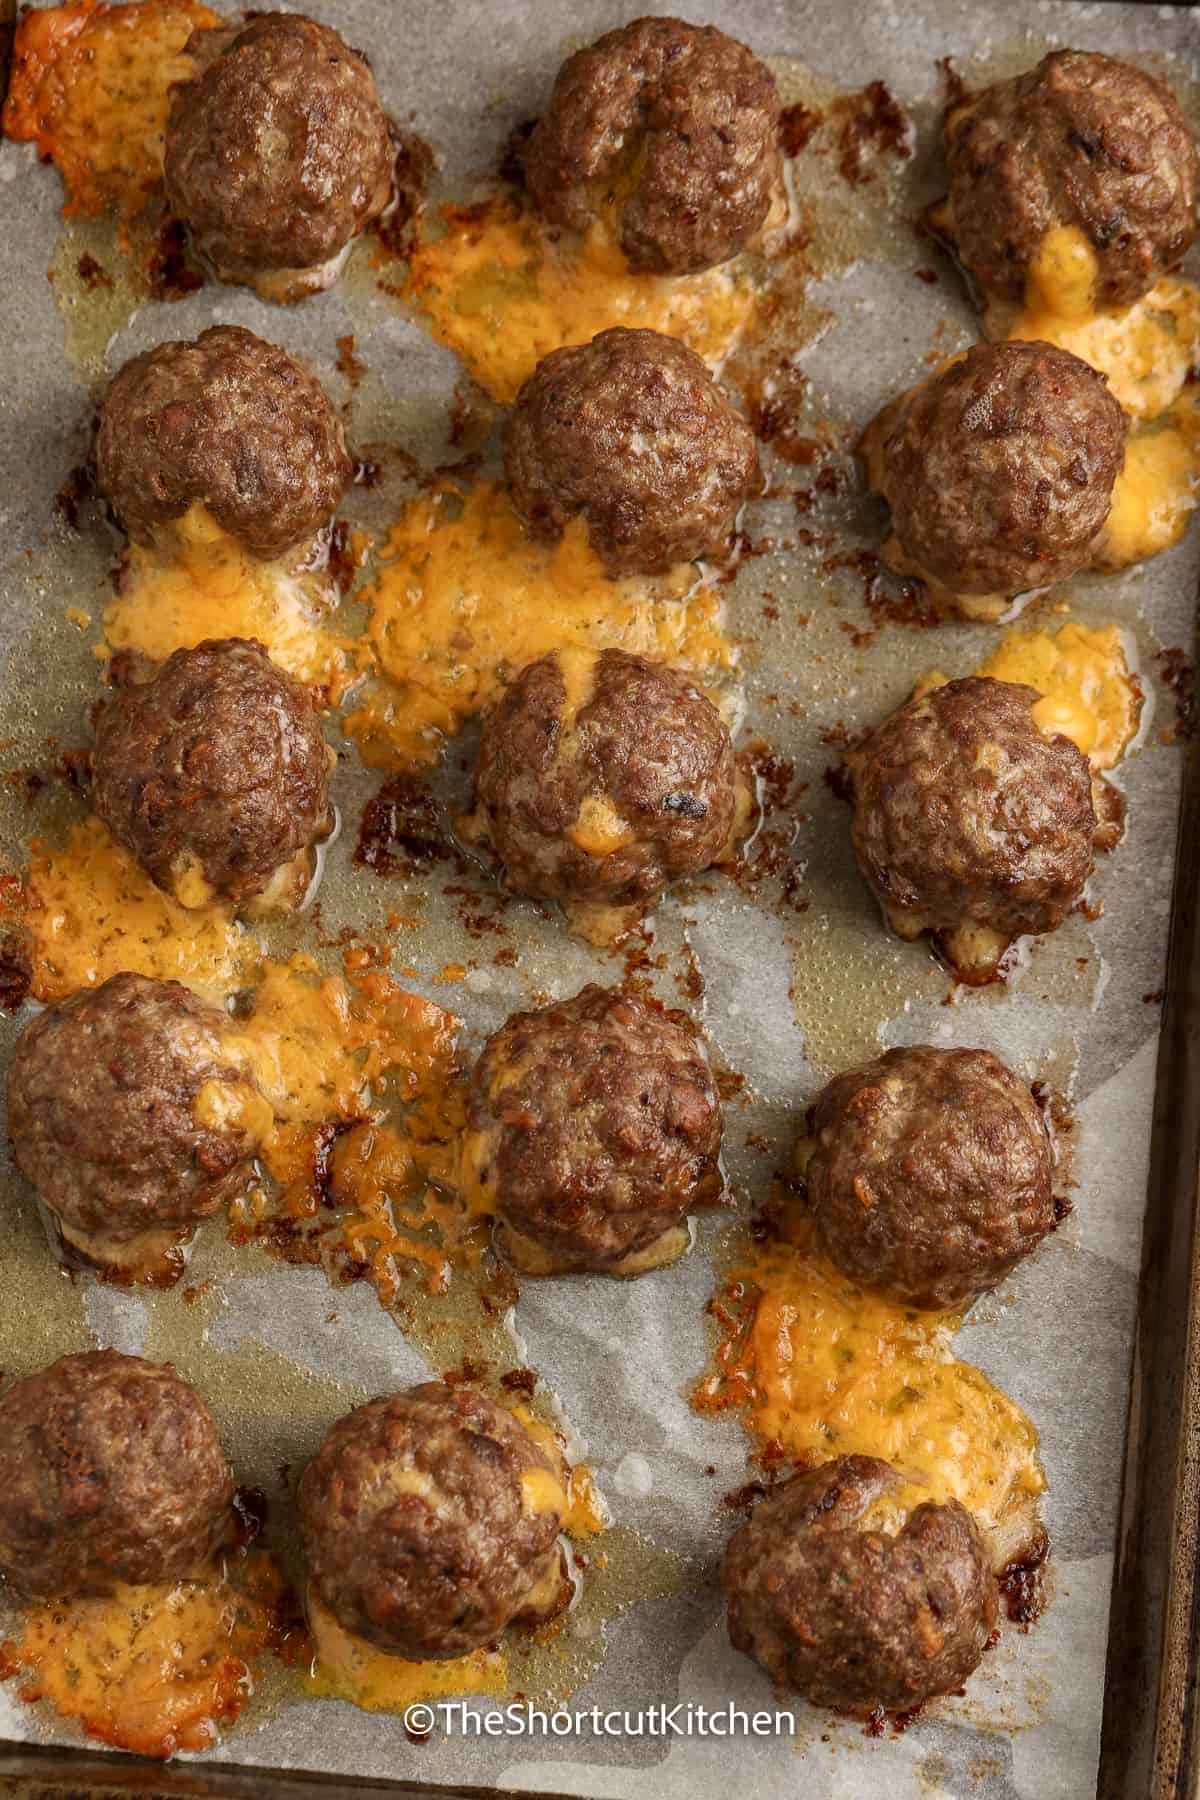 cooked meatballs on a baking tray